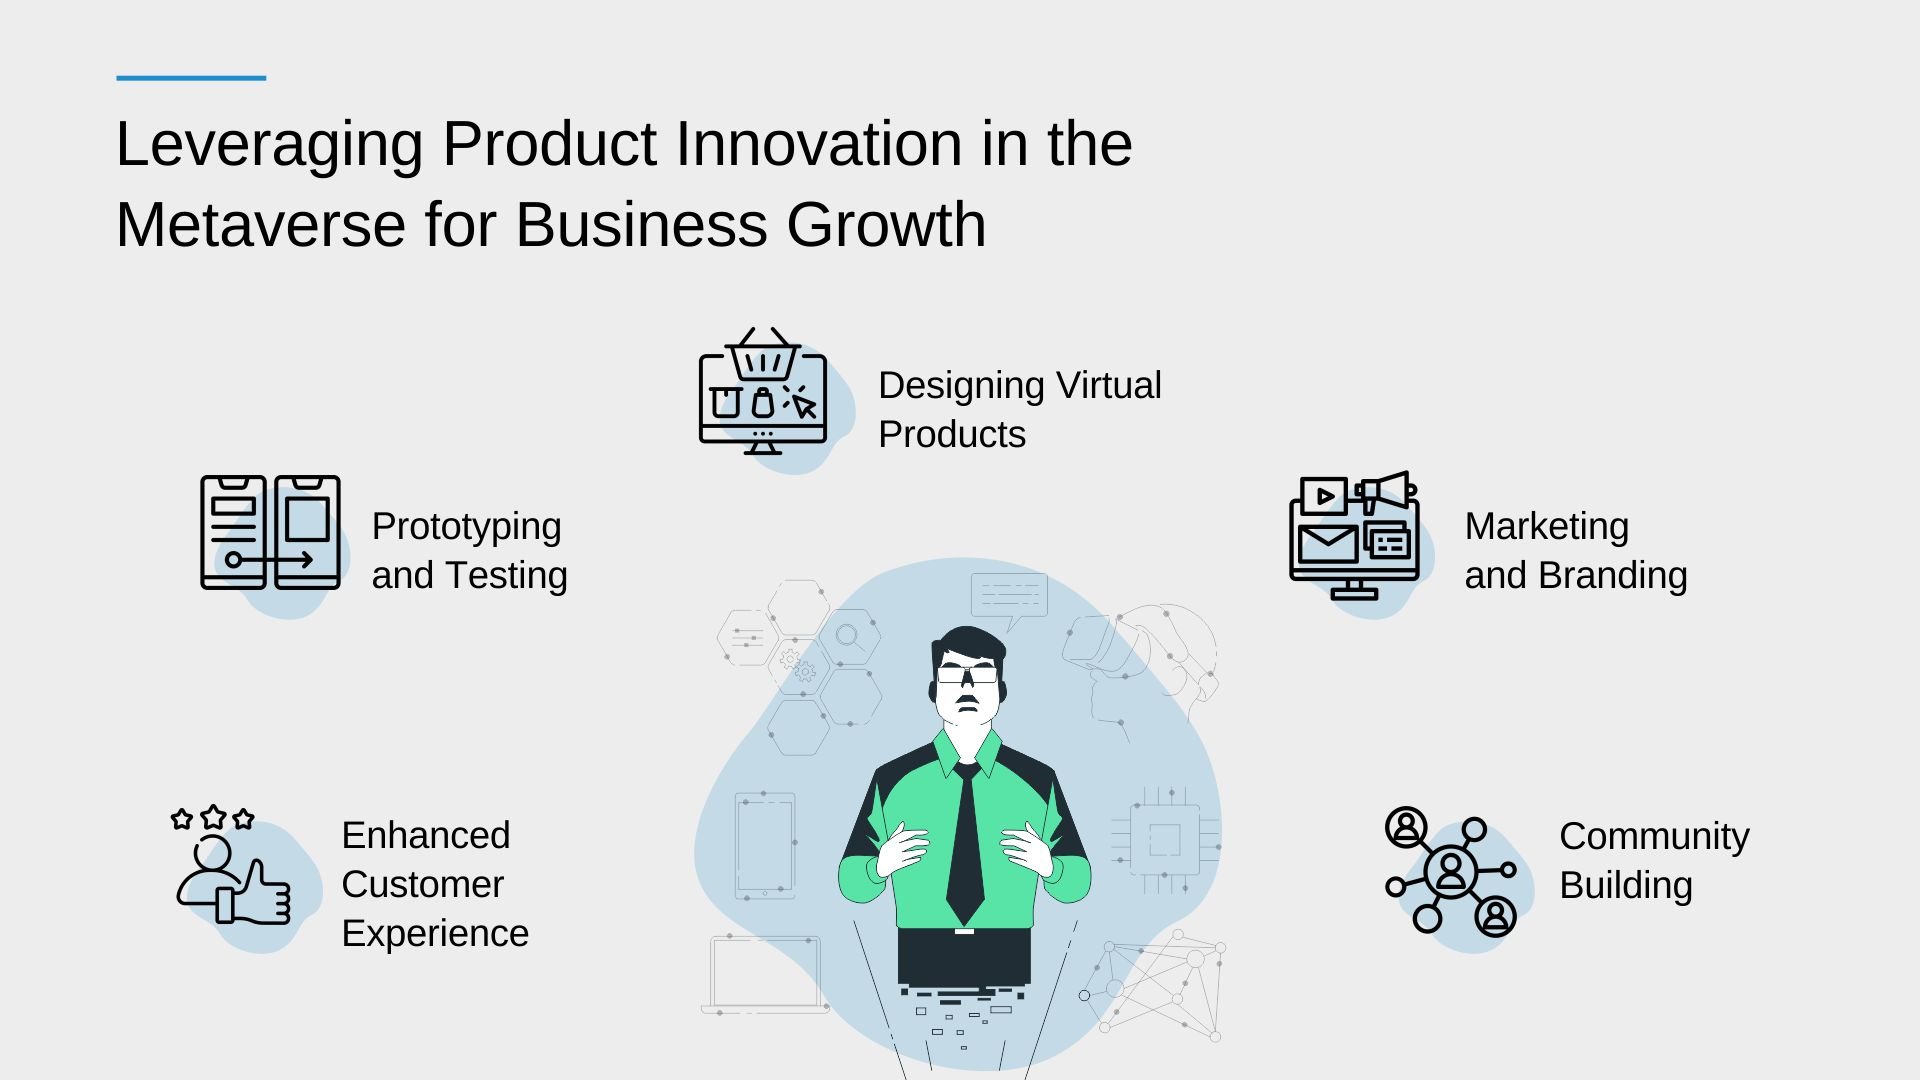 Leveraging Product Innovation in the Metaverse for Business Growth-Infographic